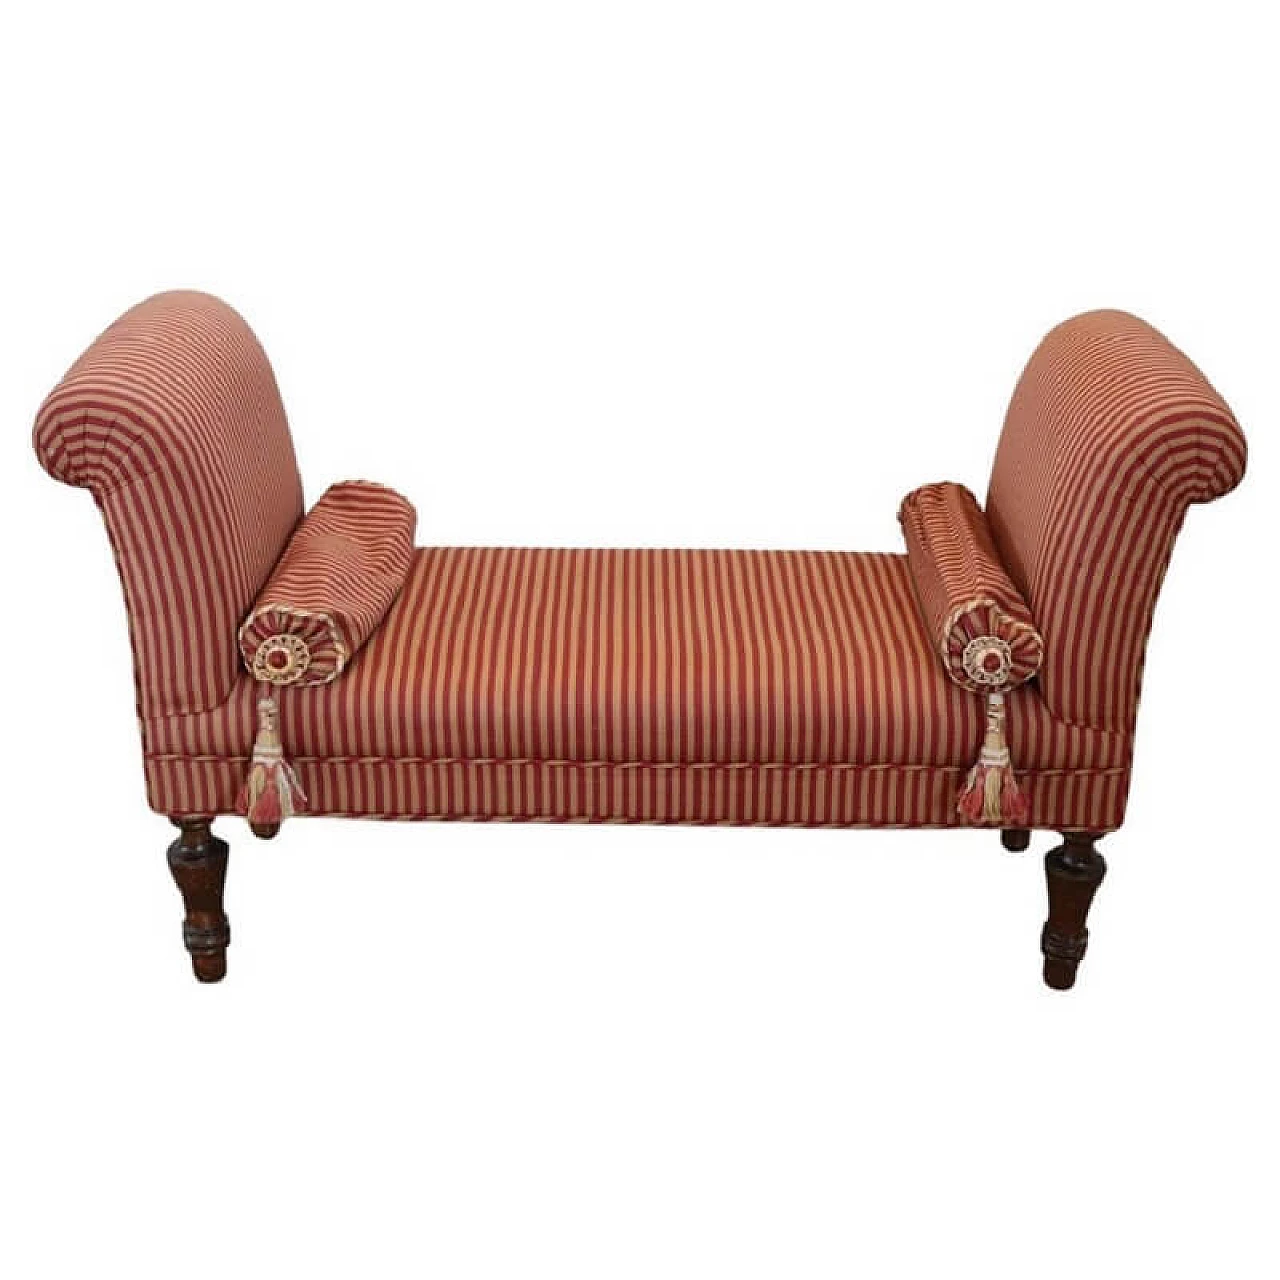 Upholstered bench upholstered in red-striped fabric with beechwood feet, 19th century 1